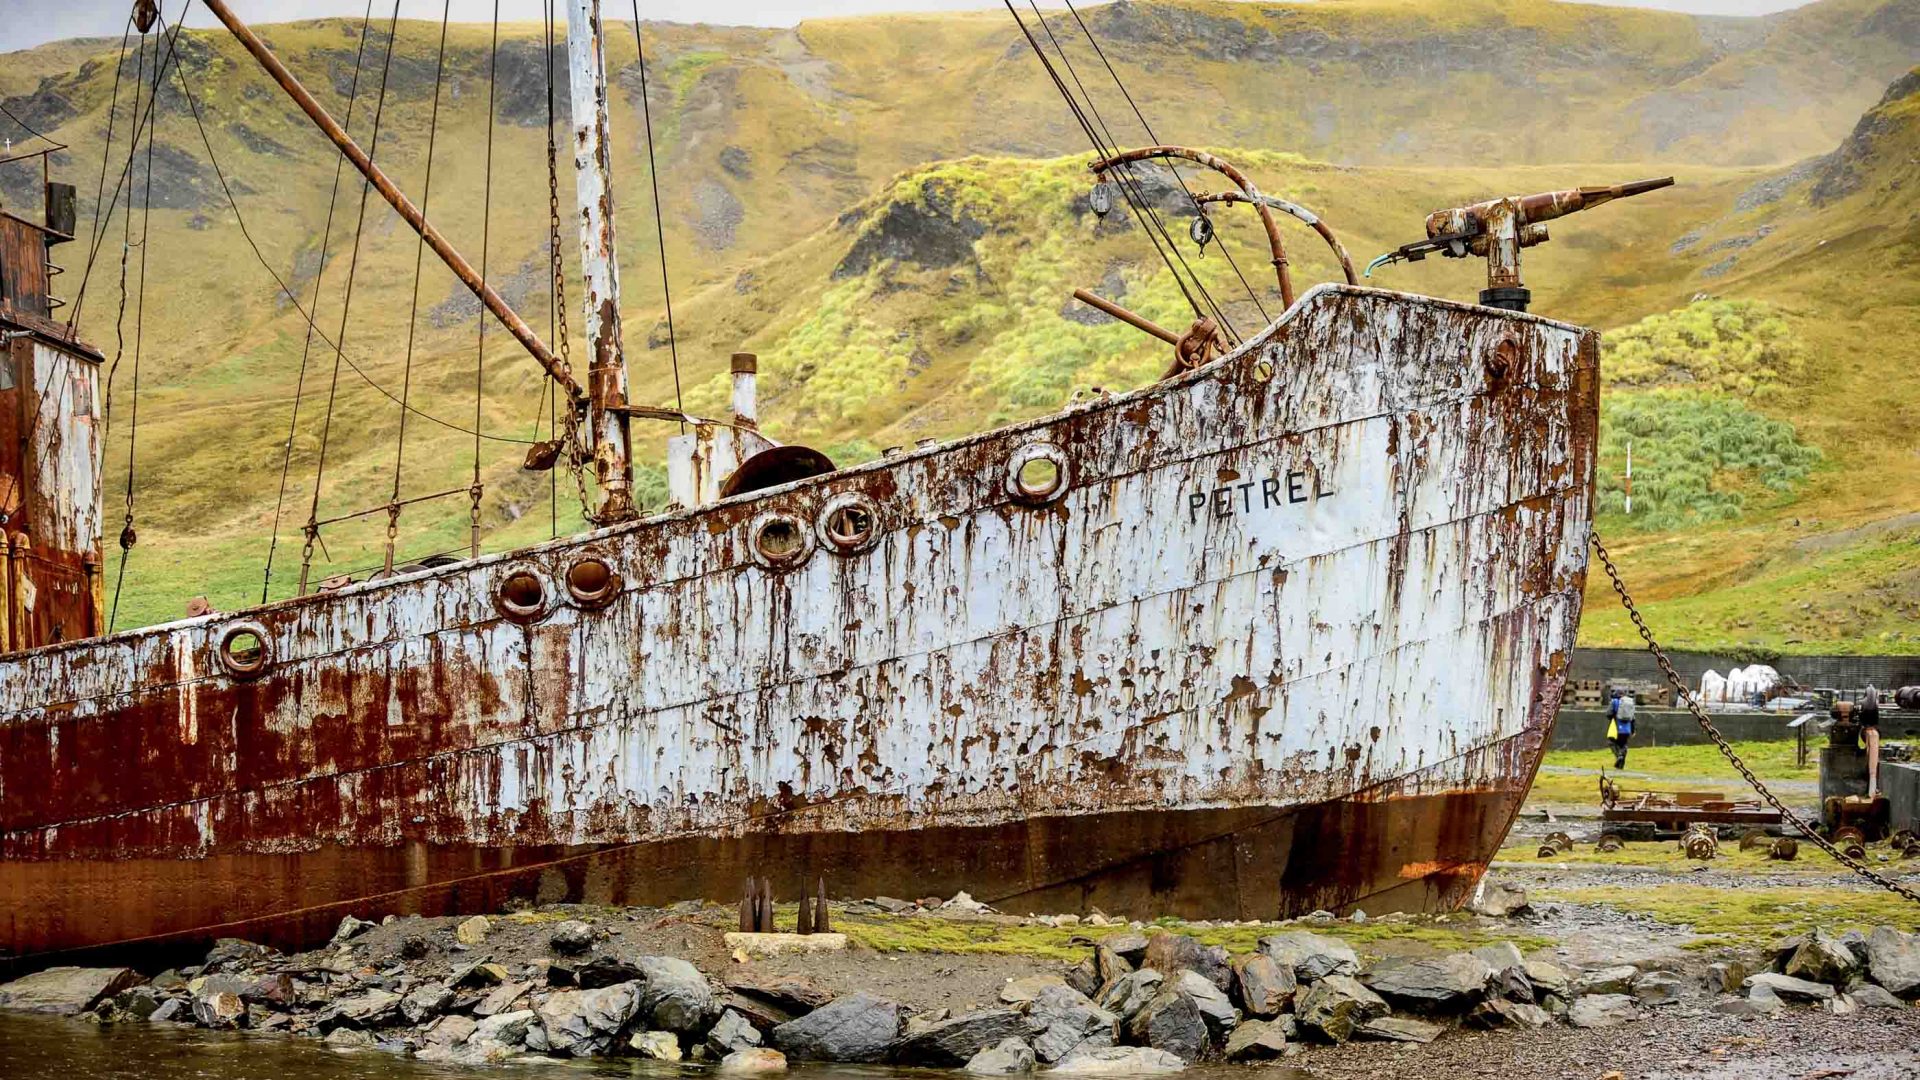 An old rusted whaling ship.